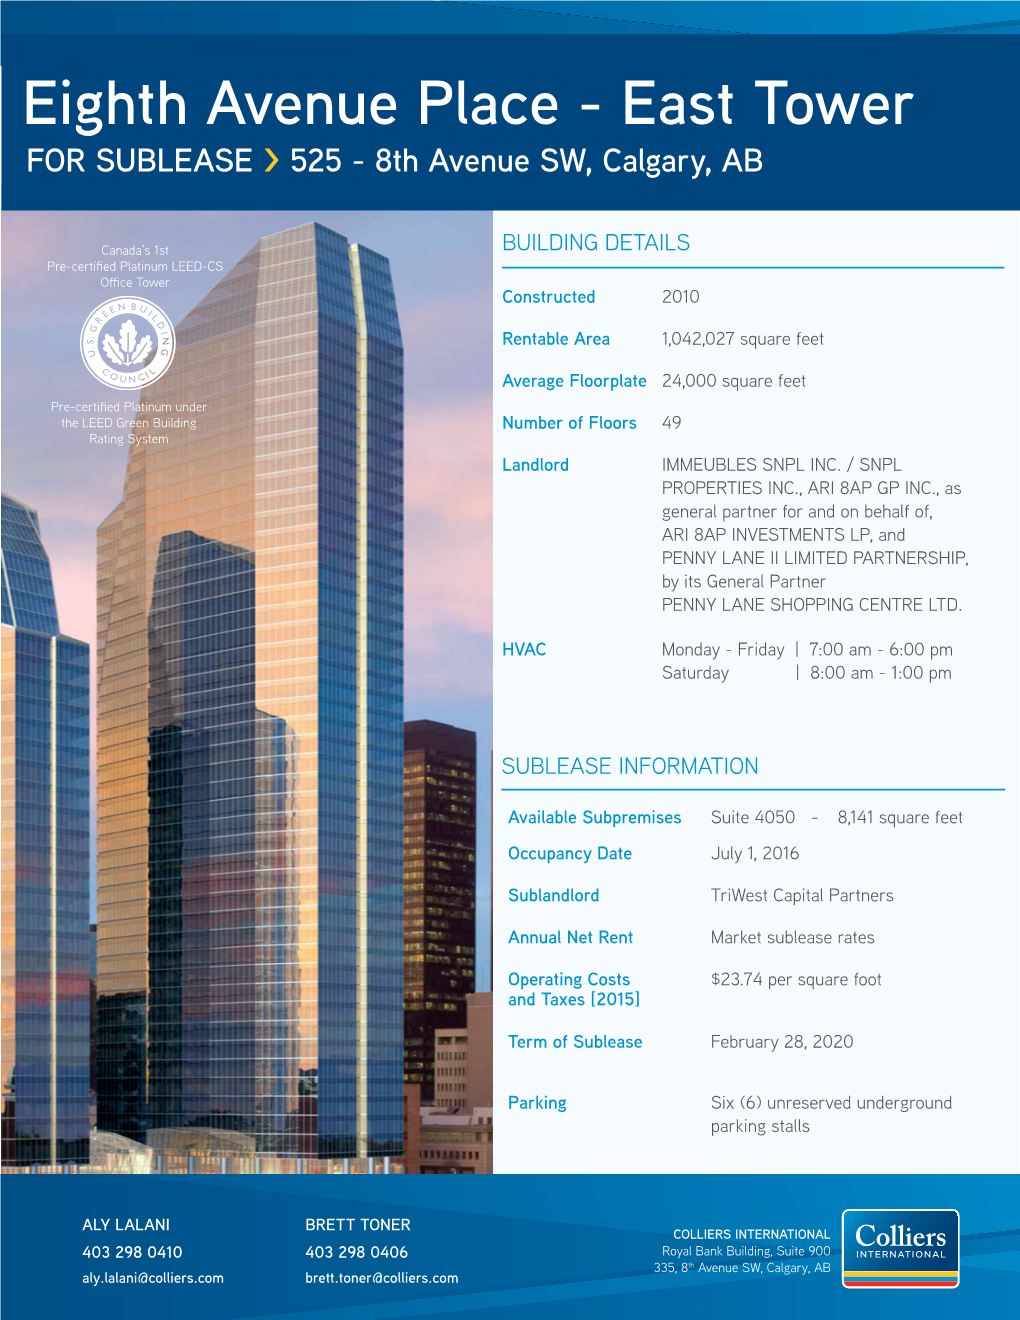 Eighth Avenue Place - East Tower for SUBLEASE > 525 - 8Th Avenue SW, Calgary, AB